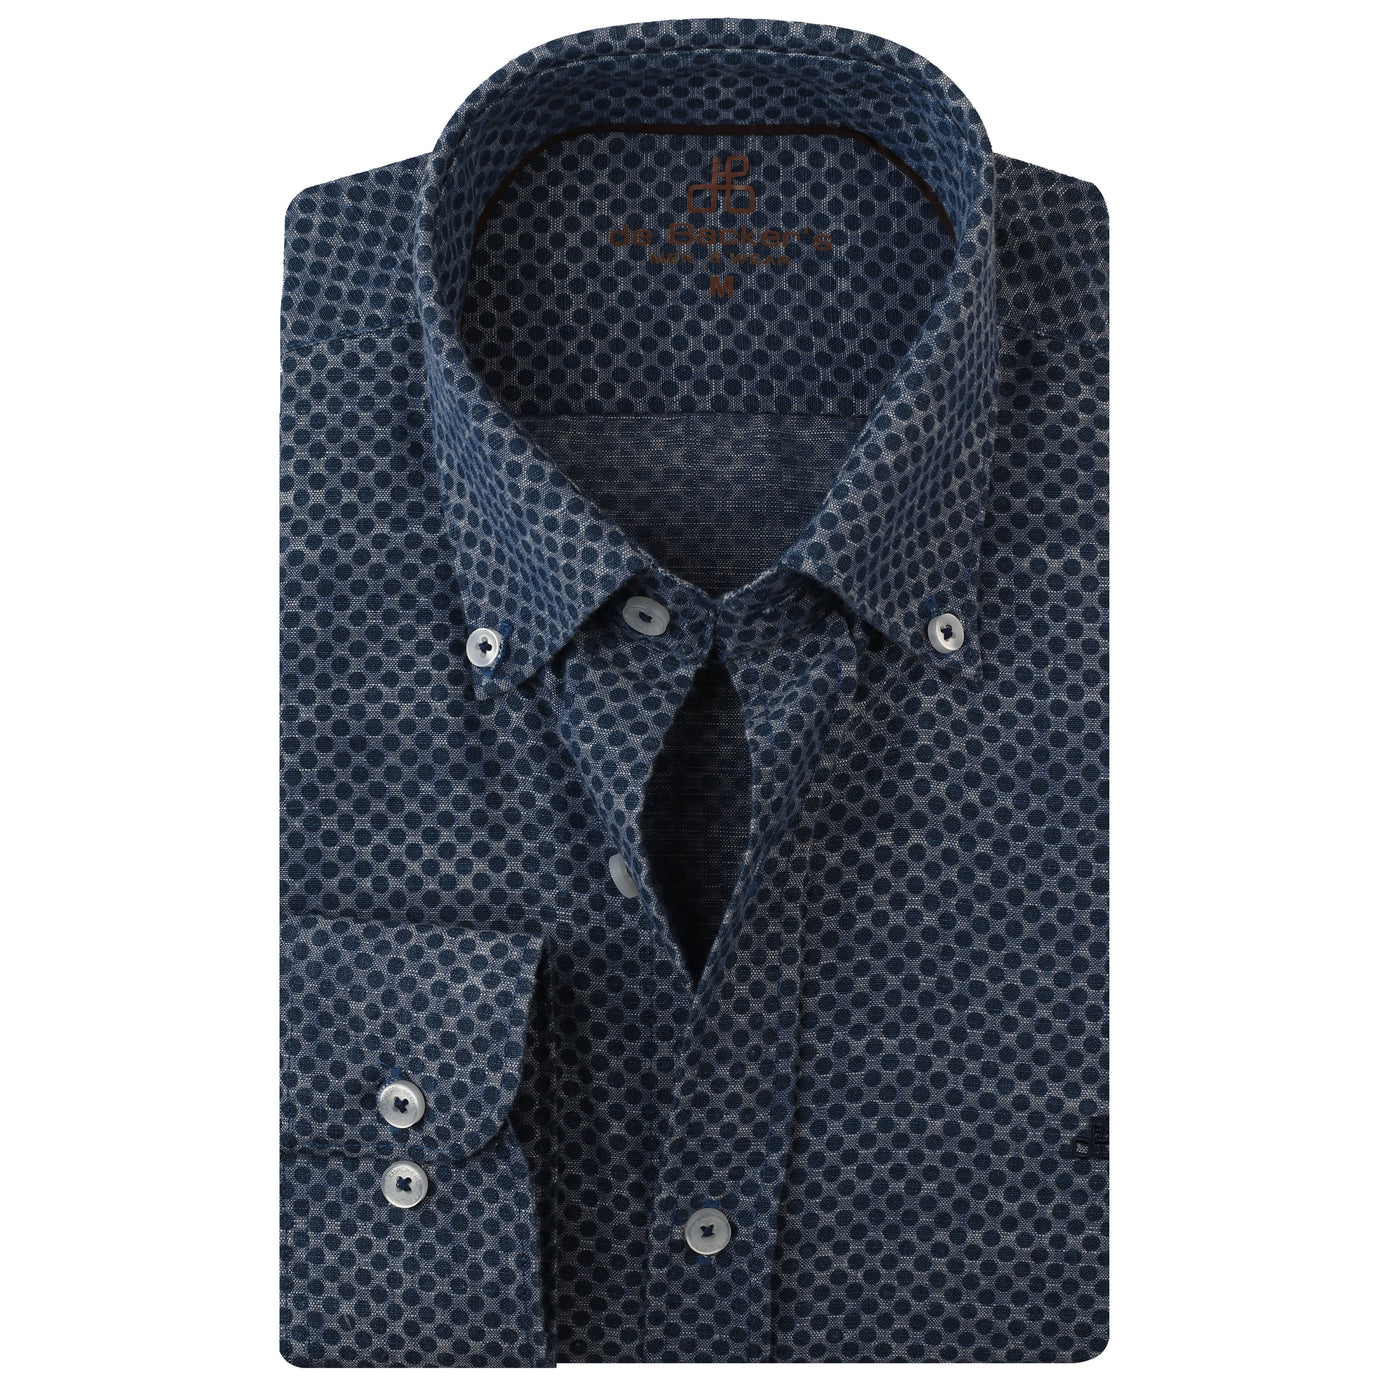 Navy patterned Casual Shirt